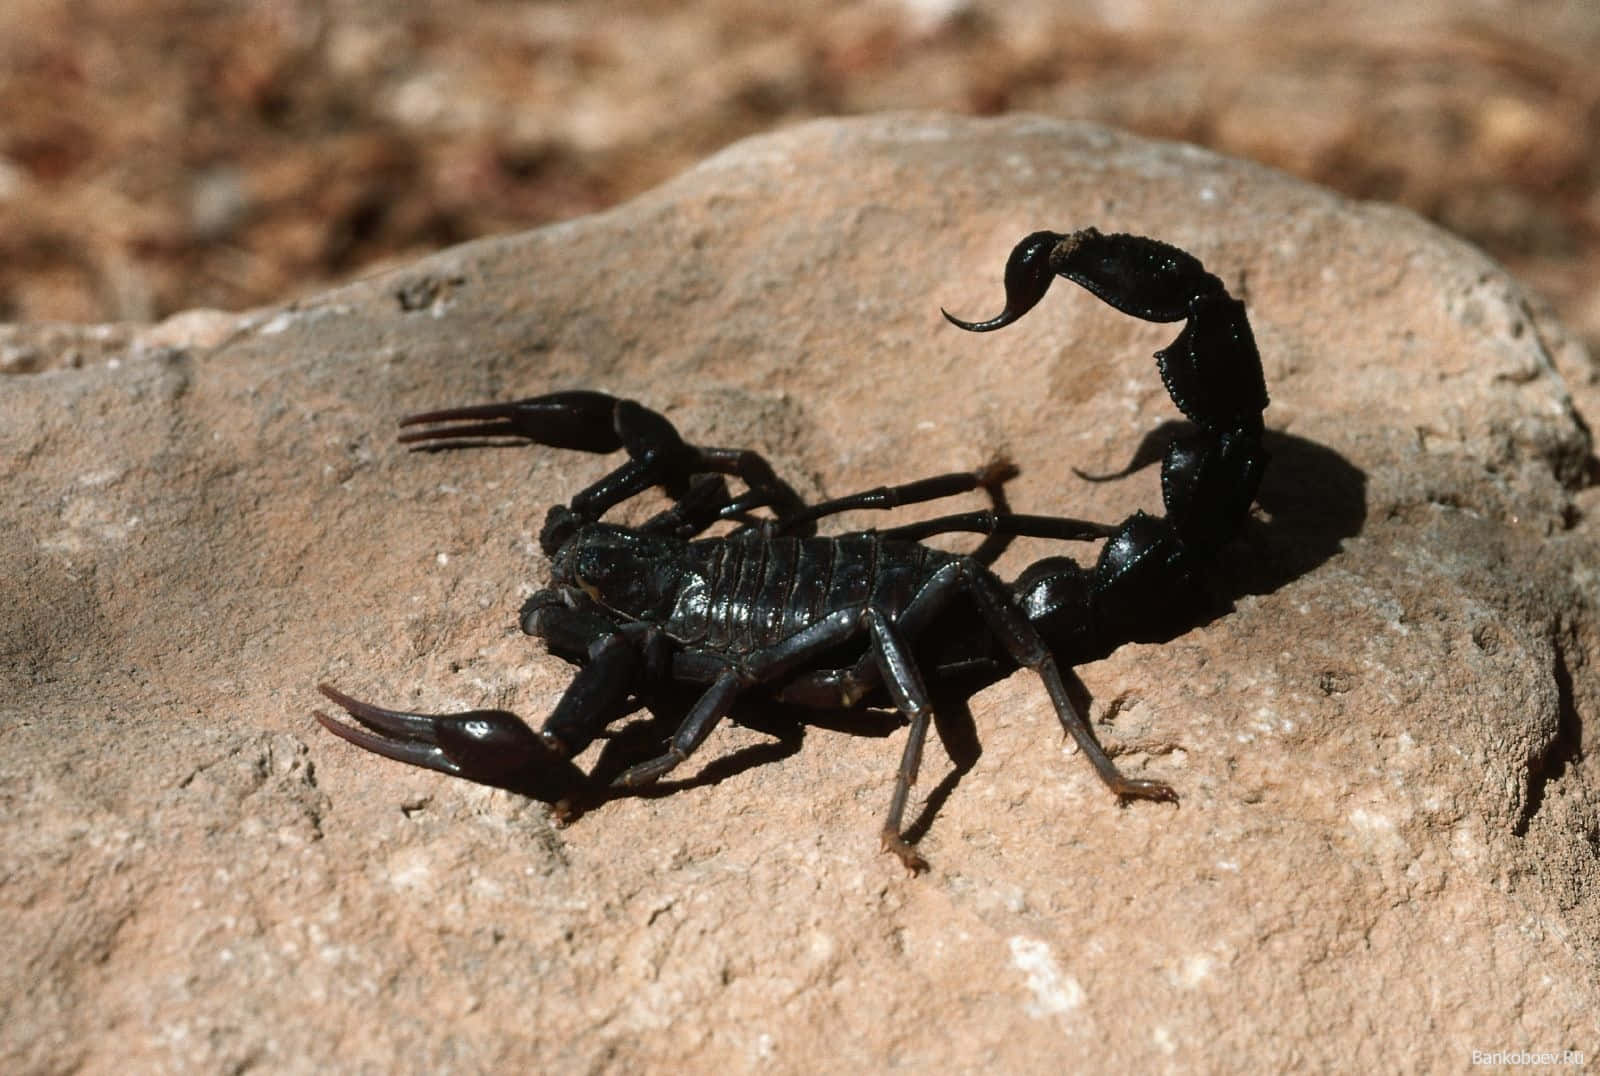 Don't Mess With the Scorpions!